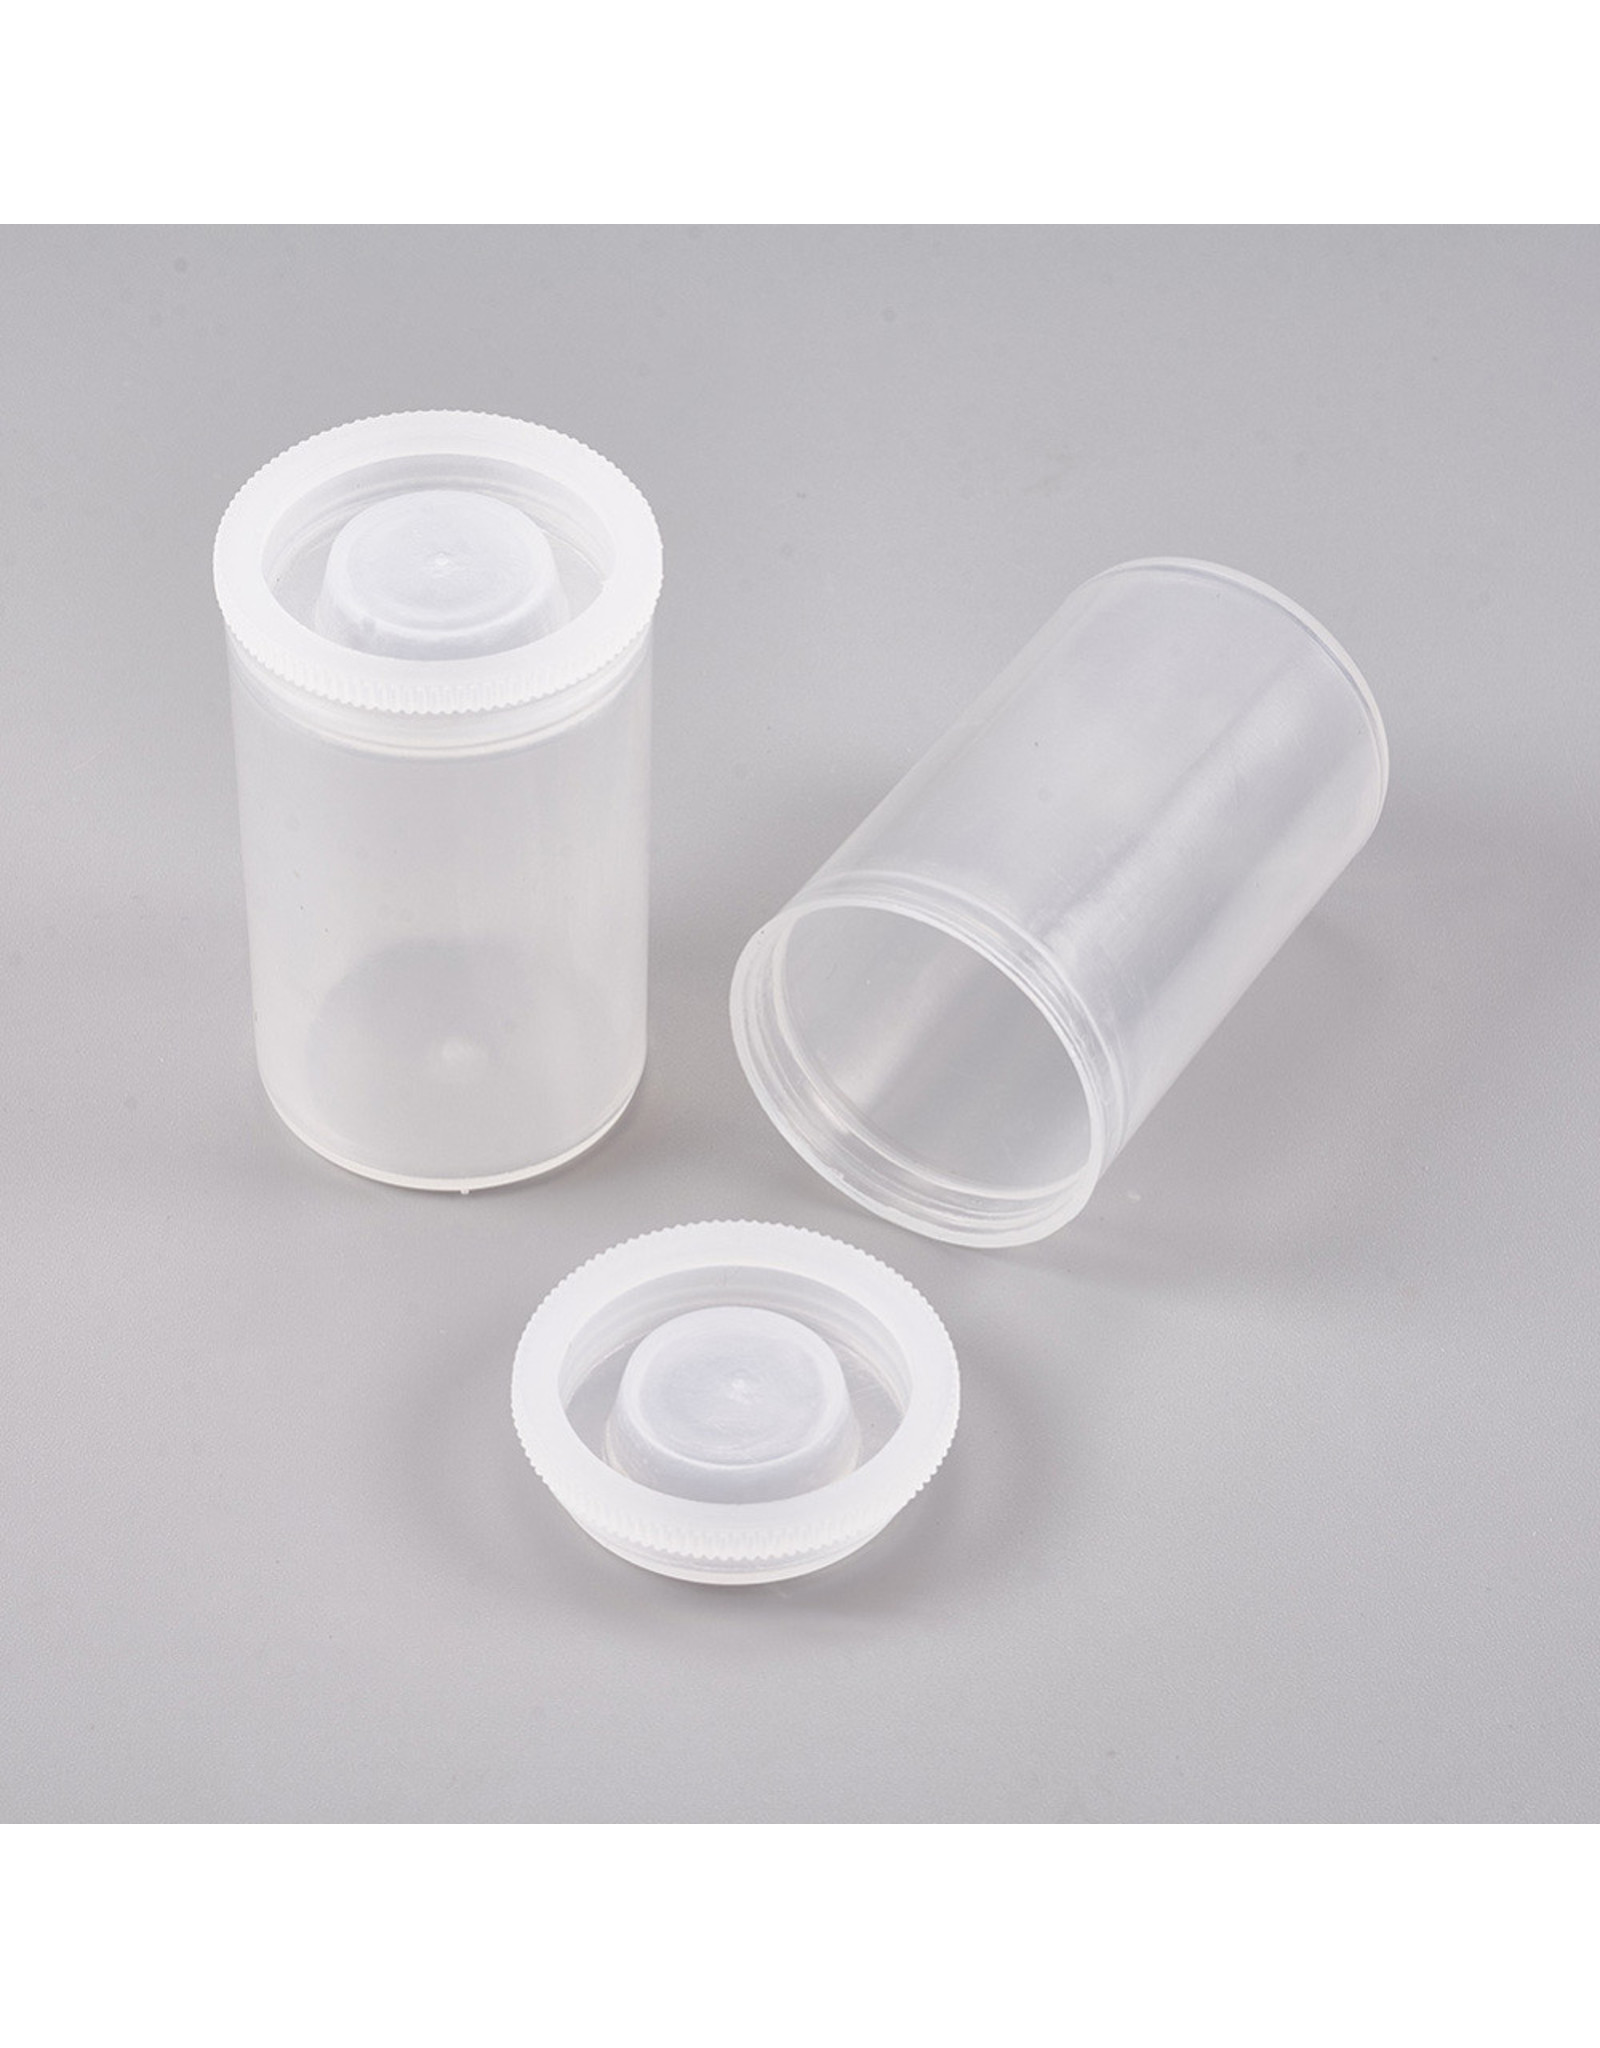 Bead Container Clear  33x54mm x5